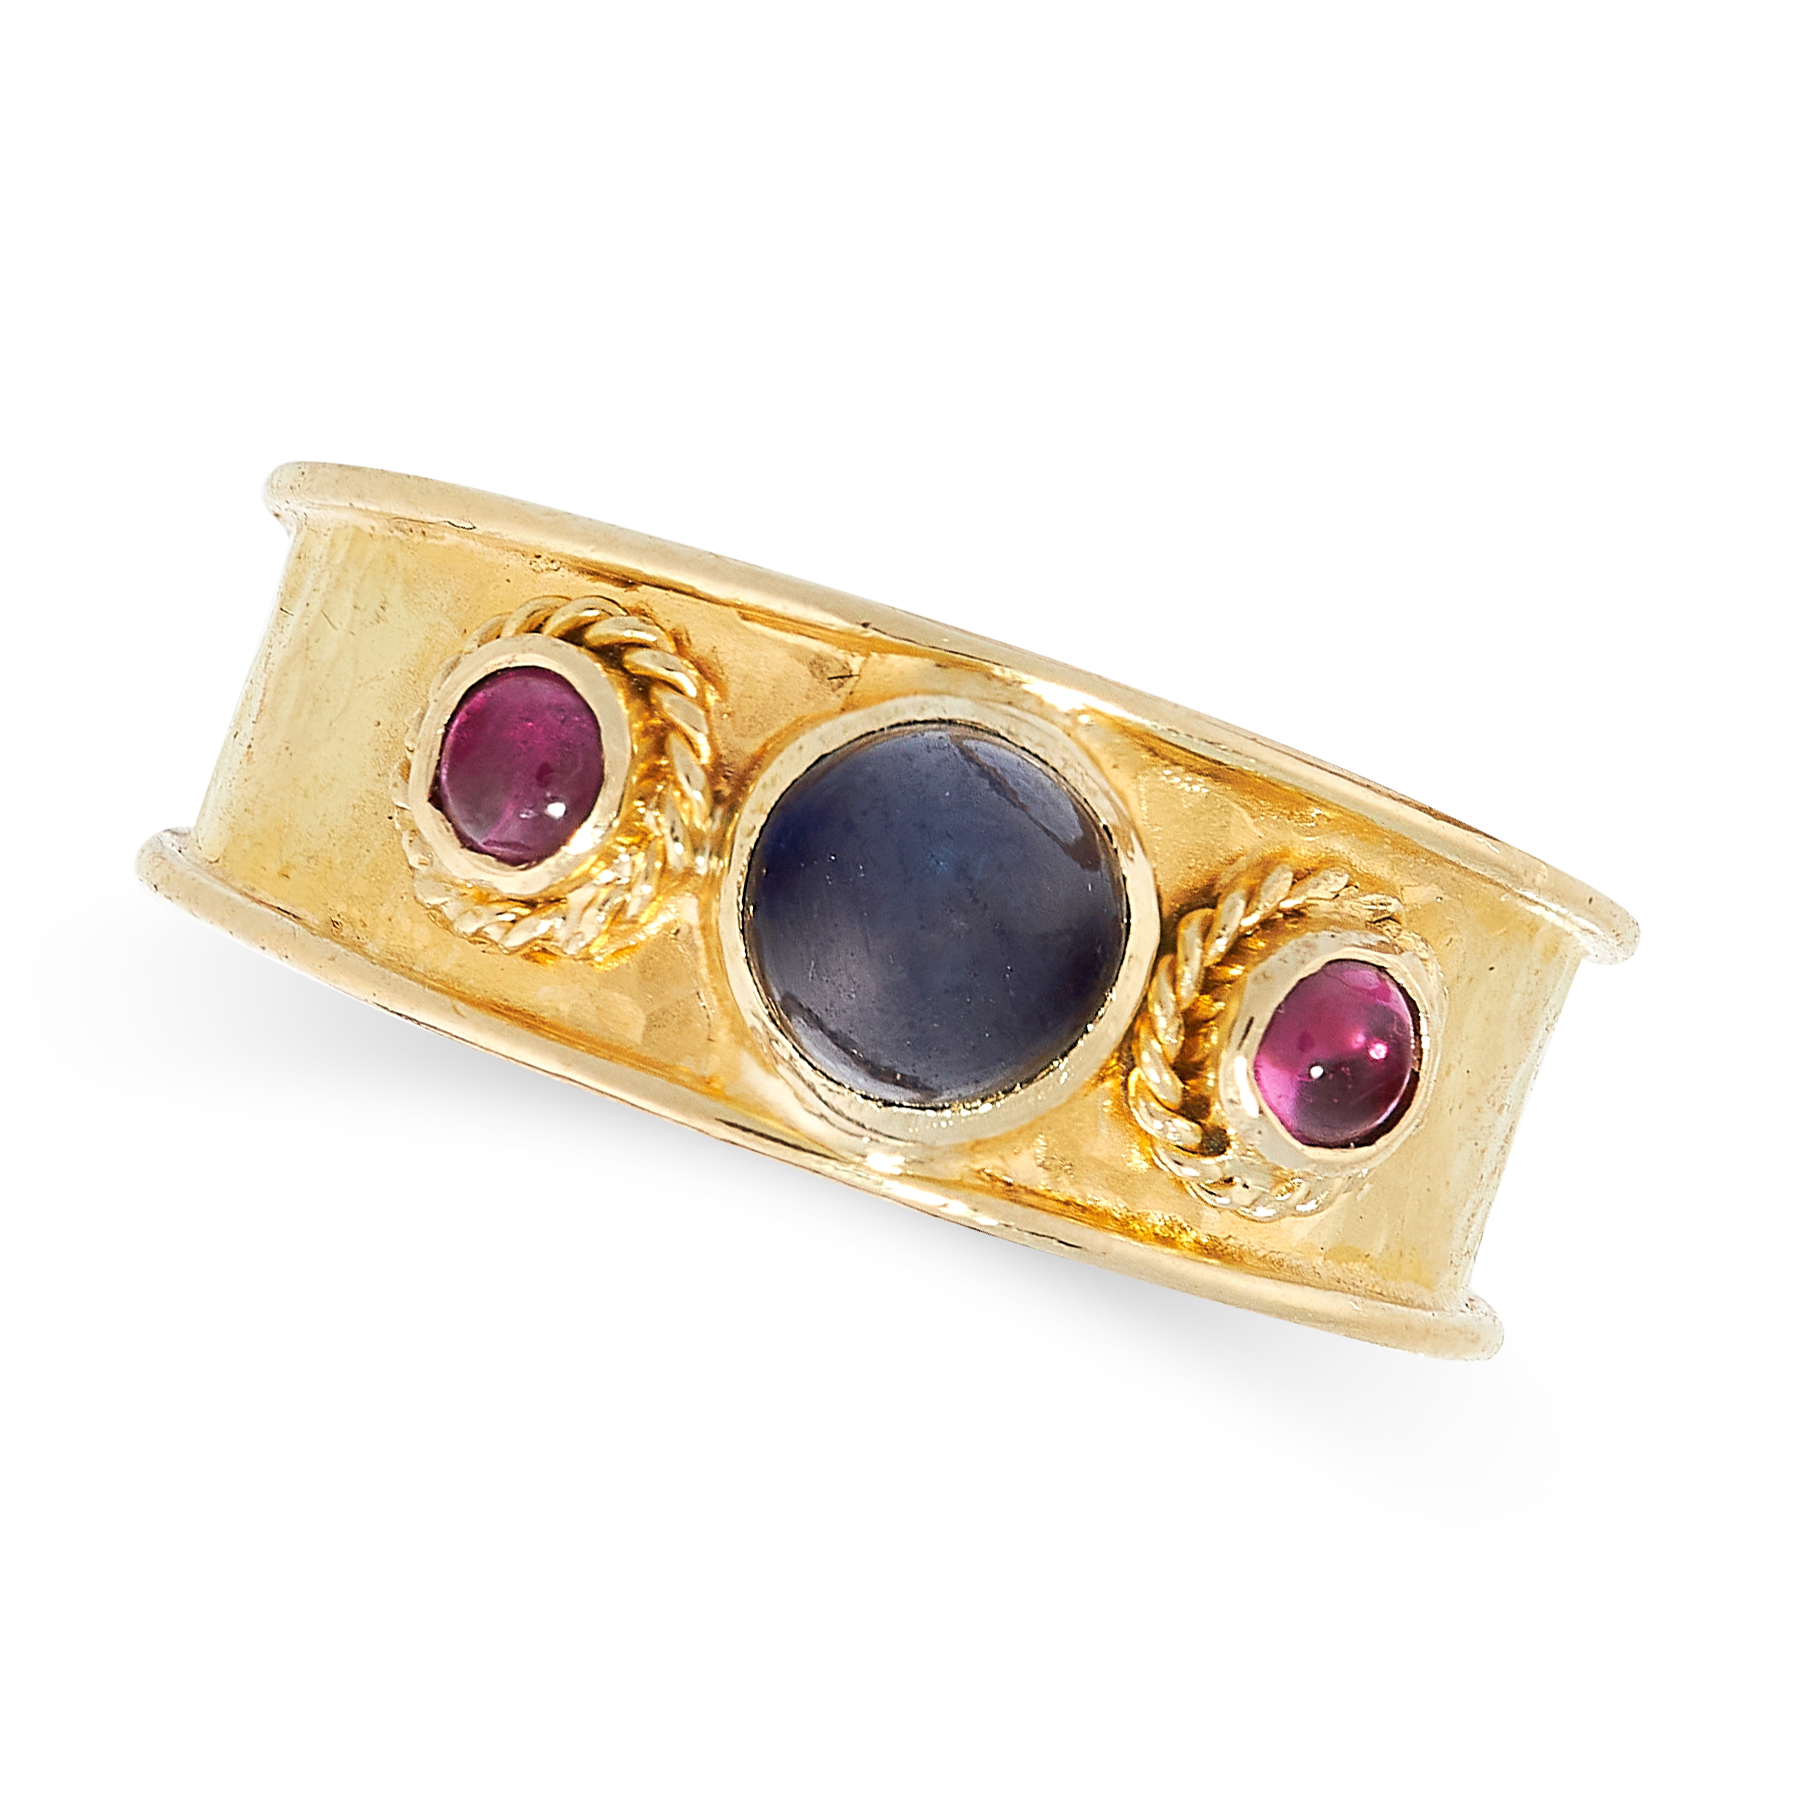 NO RESERVE - A SAPPHIRE AND RUBY RING in 18ct yellow gold, the hammered gold band is set with a